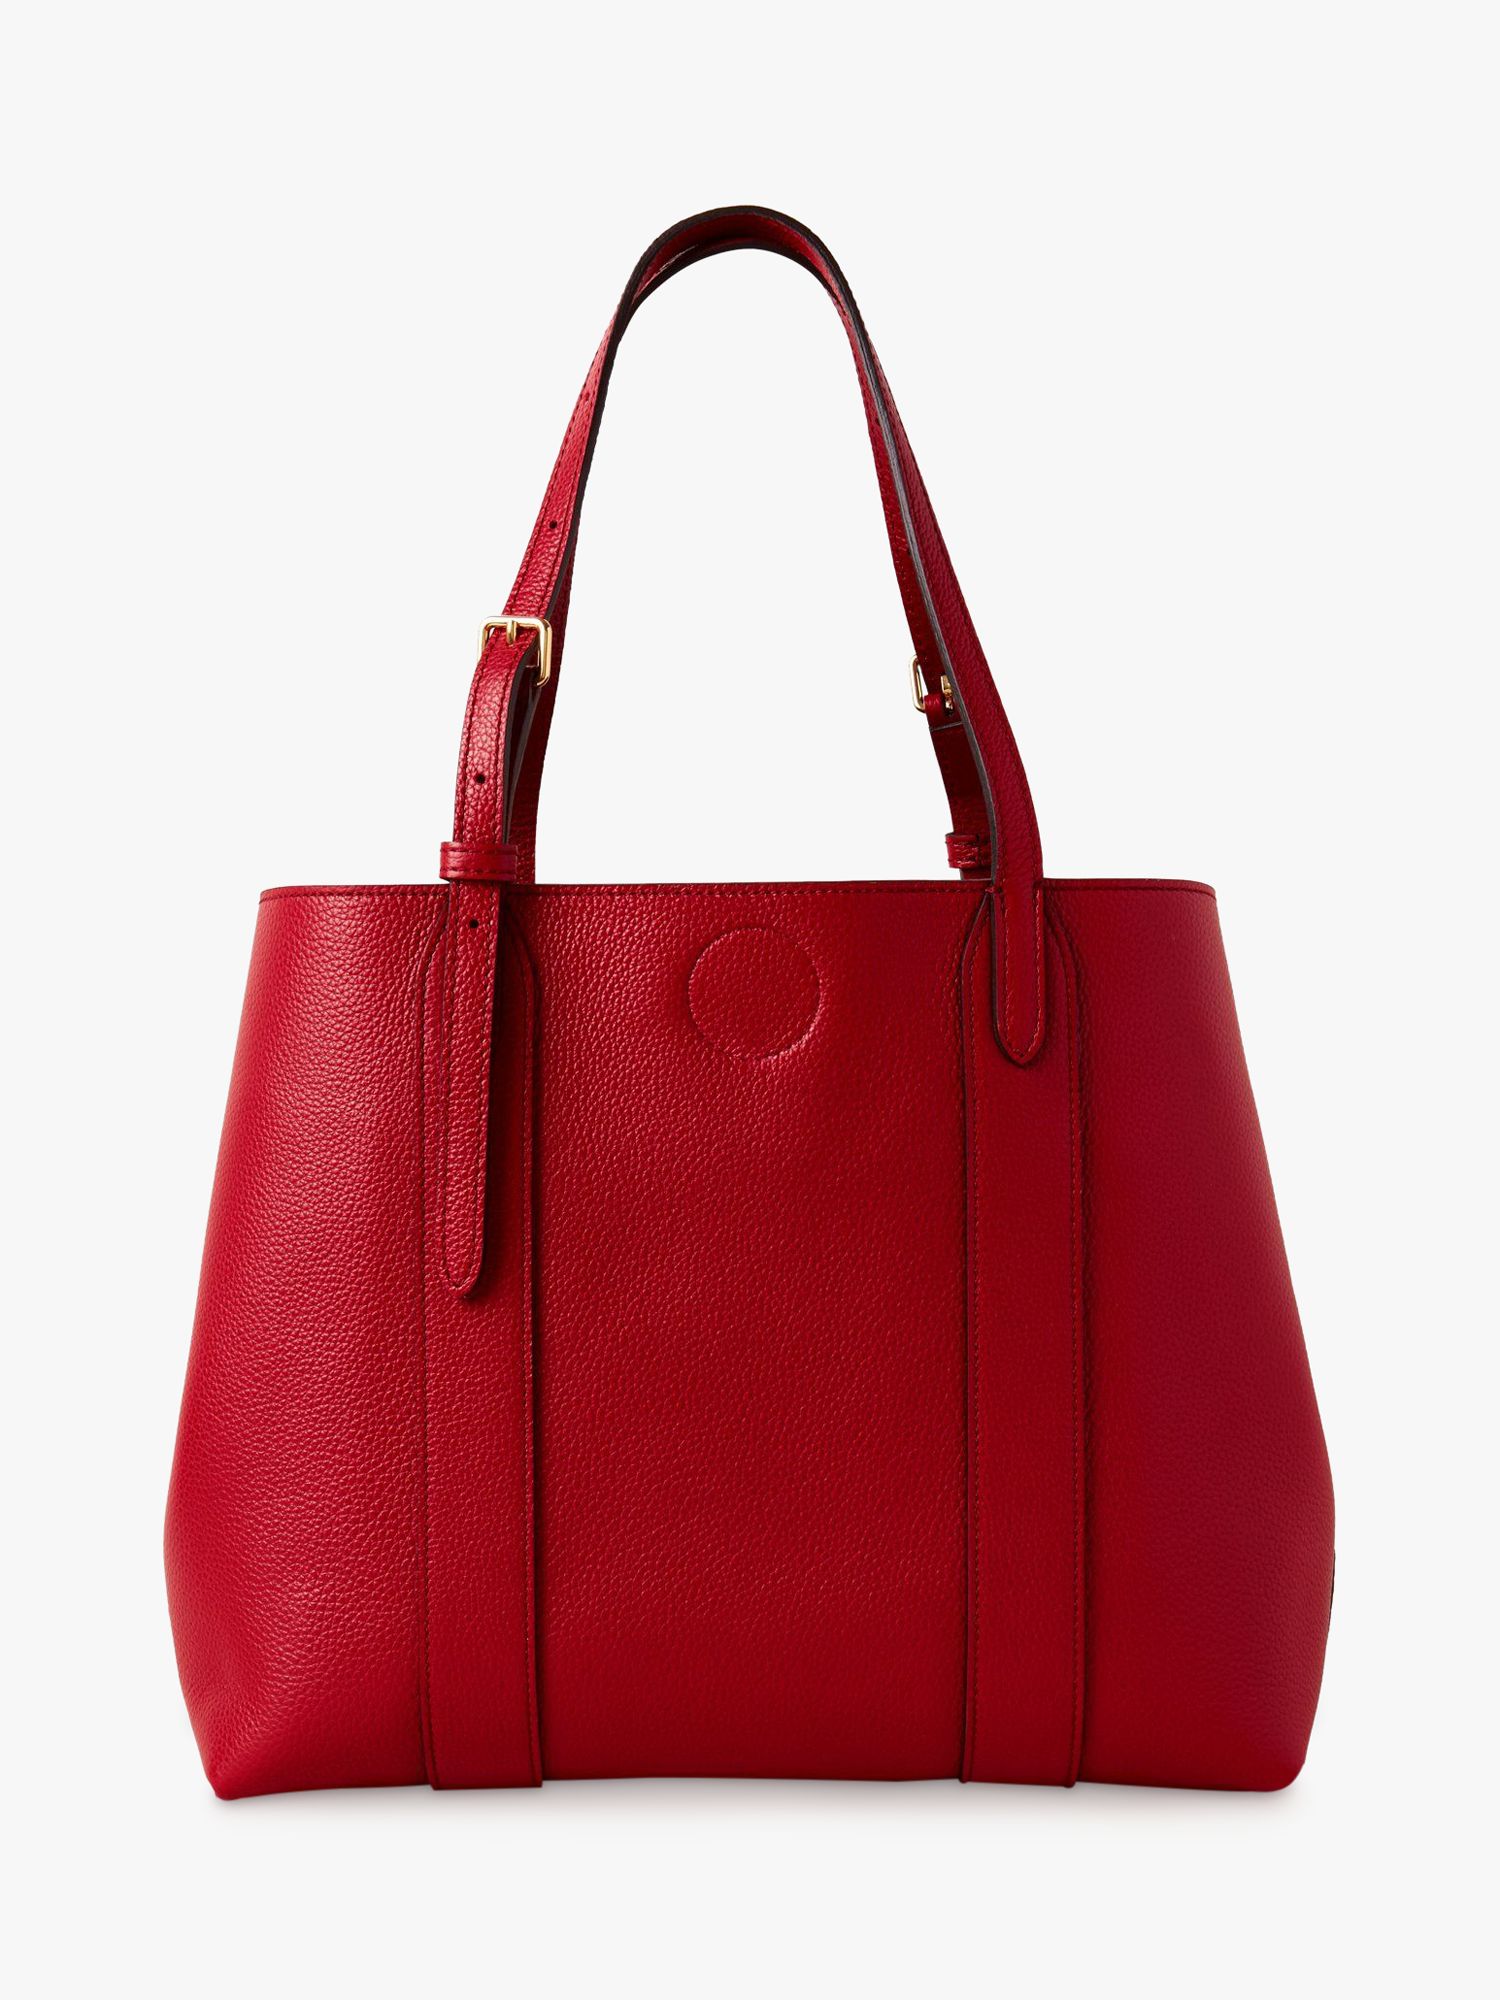 Mulberry Small Bayswater Classic Grain Leather Tote Bag, Scarlet at John Lewis & Partners